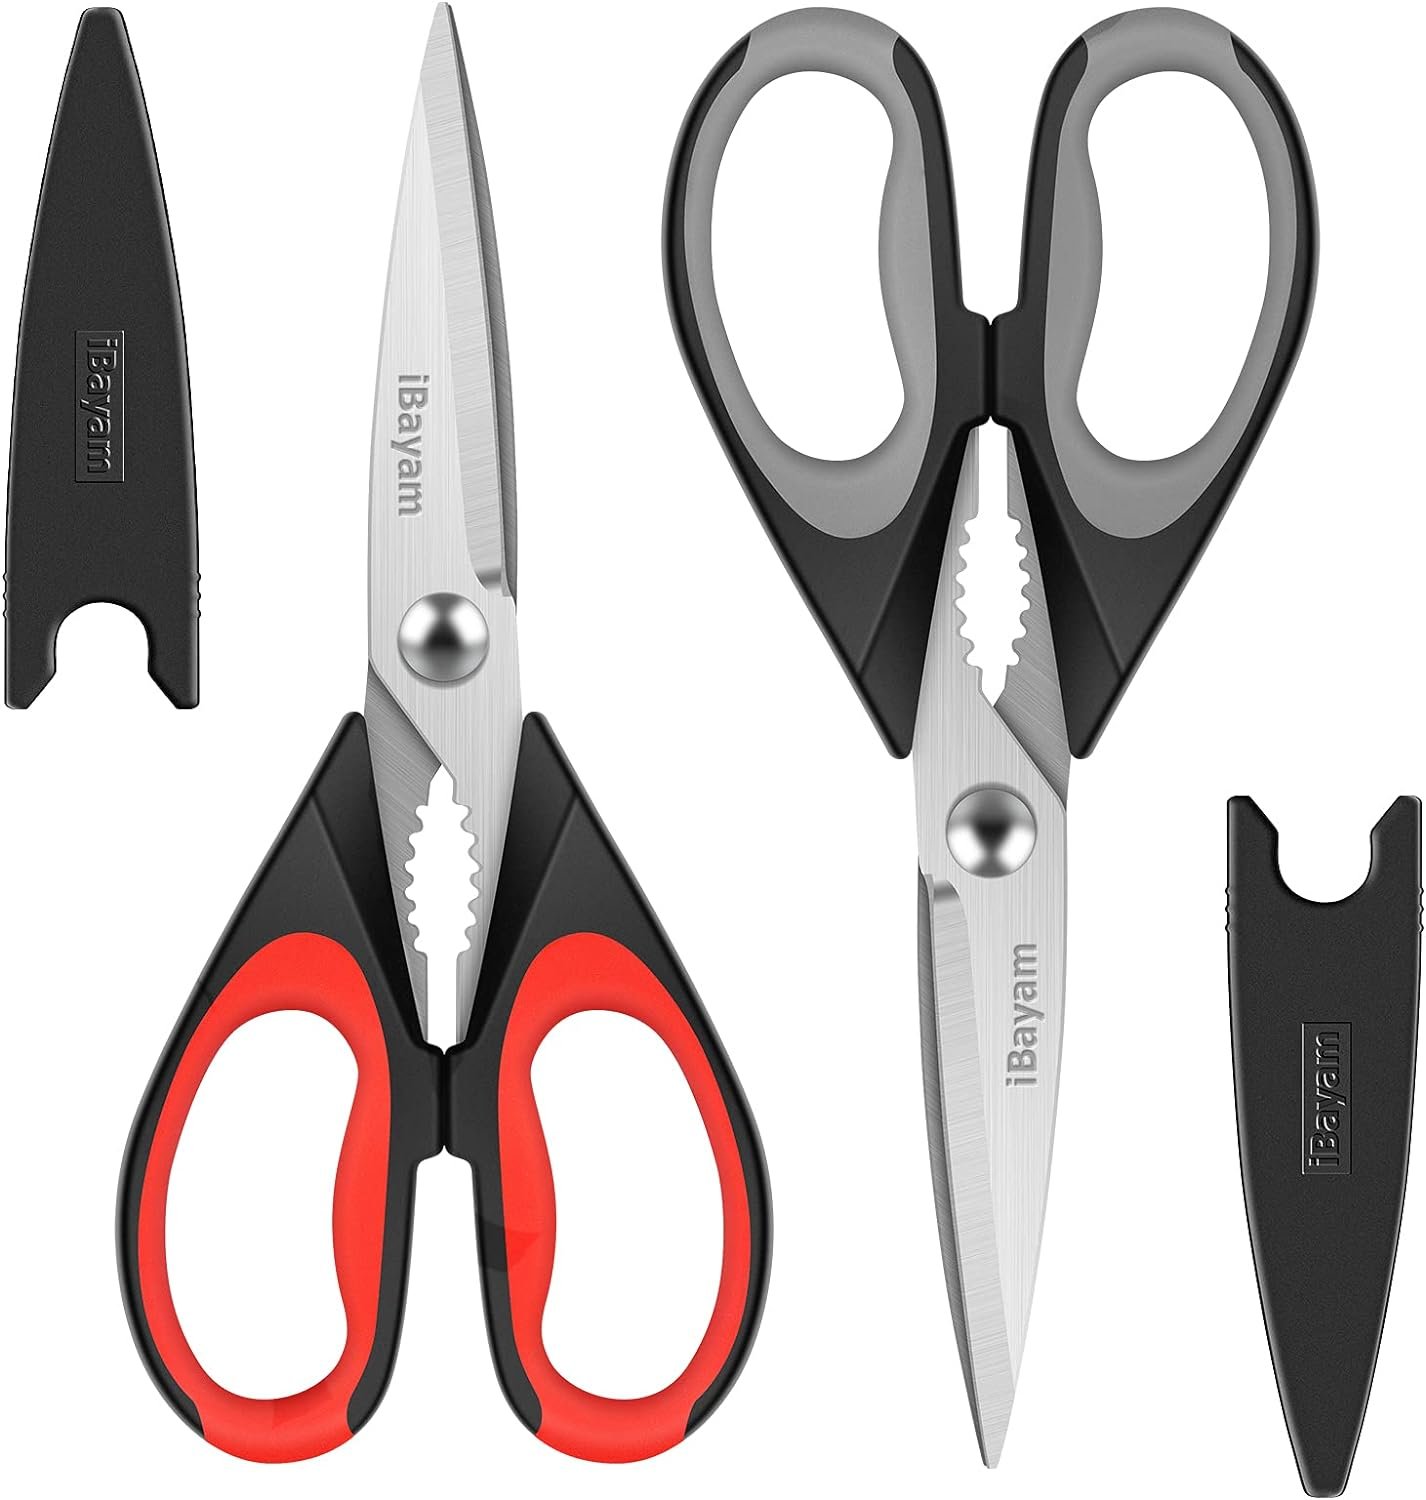 Kitchen Shears, iBayam Kitchen Scissors All Purpose Heavy Duty Meat Scissors Poultry Shears, Dishwasher Safe Food Cooking Scissors Stainless Steel Utility Scissors, 2-Pack (Black Red, Black Gray)